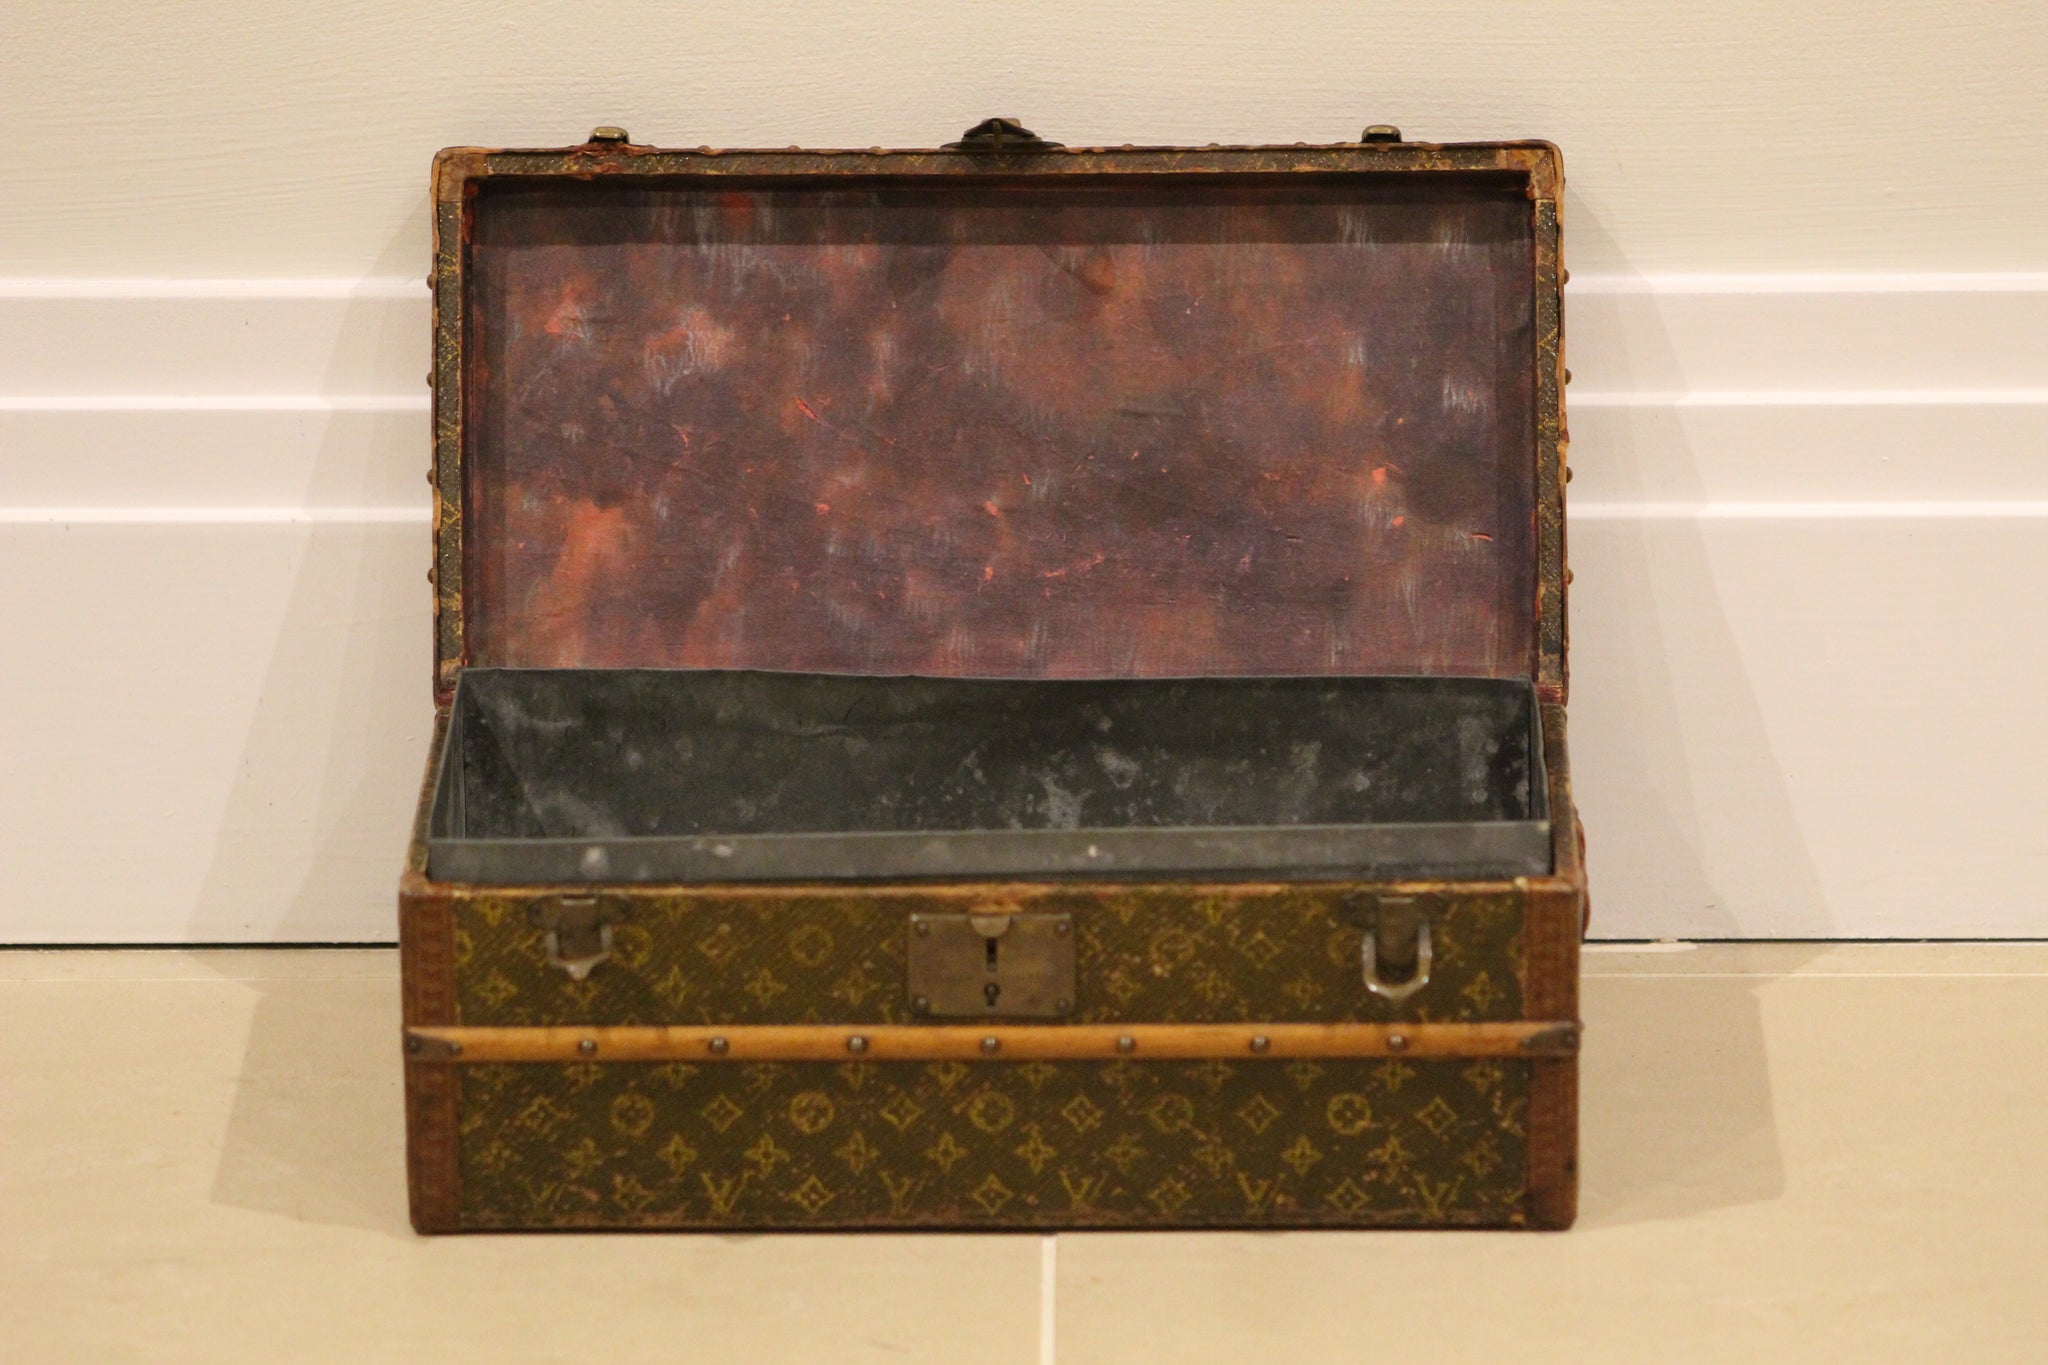 French Monogrammed Cabin Trunk from Louis Vuitton, 1920s for sale